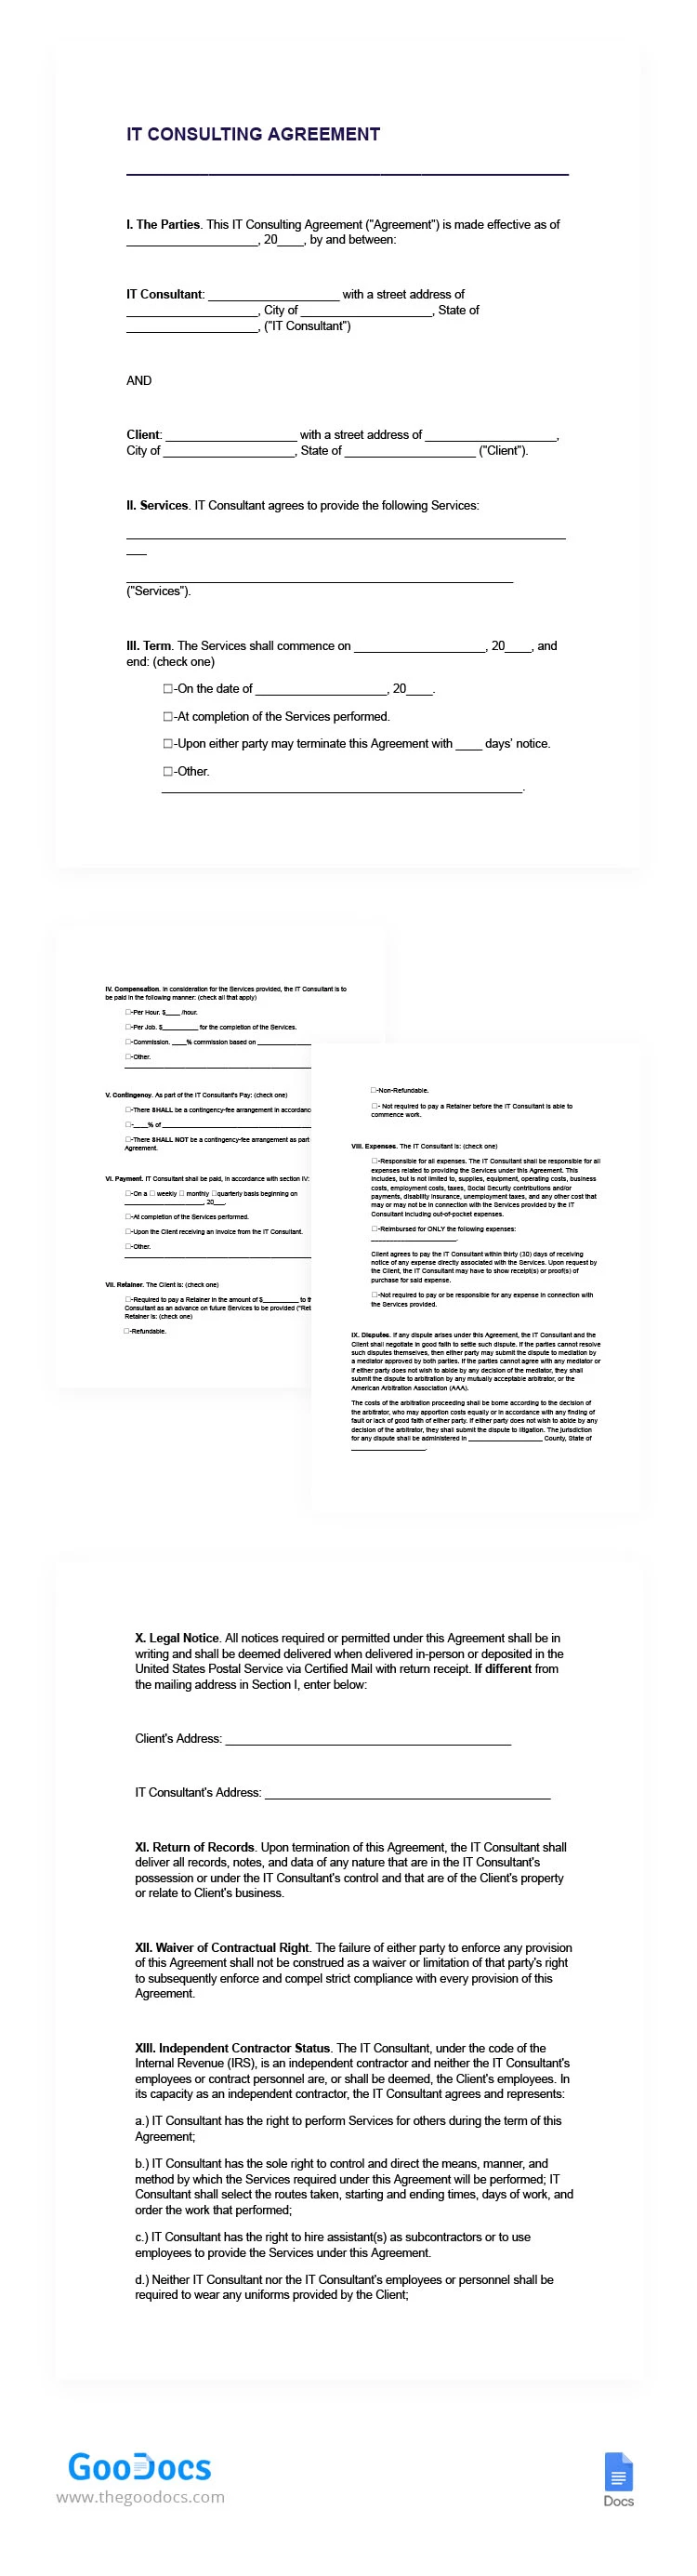 IT Consulting Agreement - free Google Docs Template - 10066529